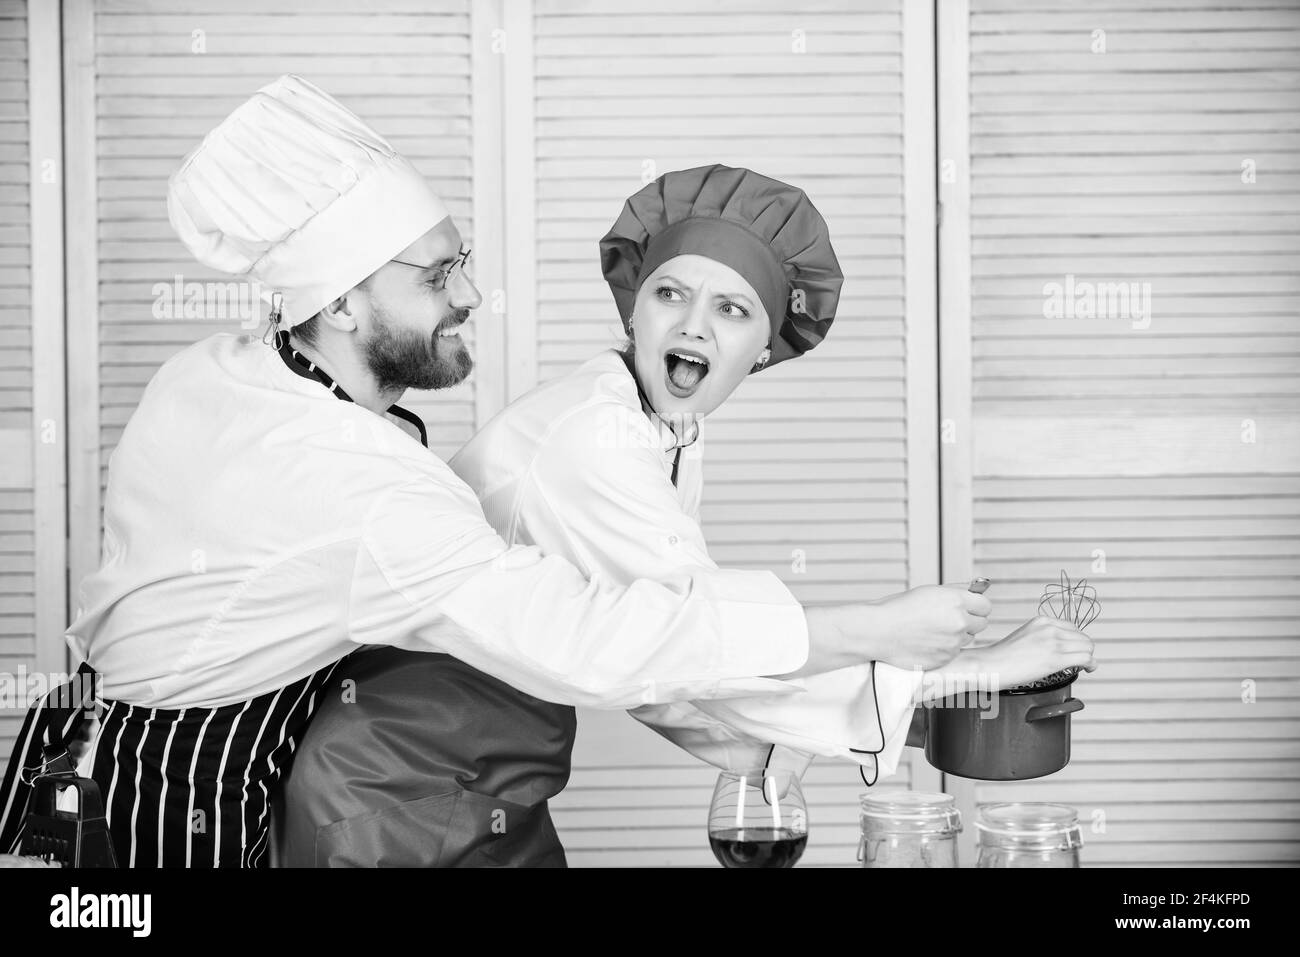 Woman and bearded man chef cooking together. Delicious meal. Baking pie together. Cooking together is more fun. Let my try taste. Couple having fun Stock Photo